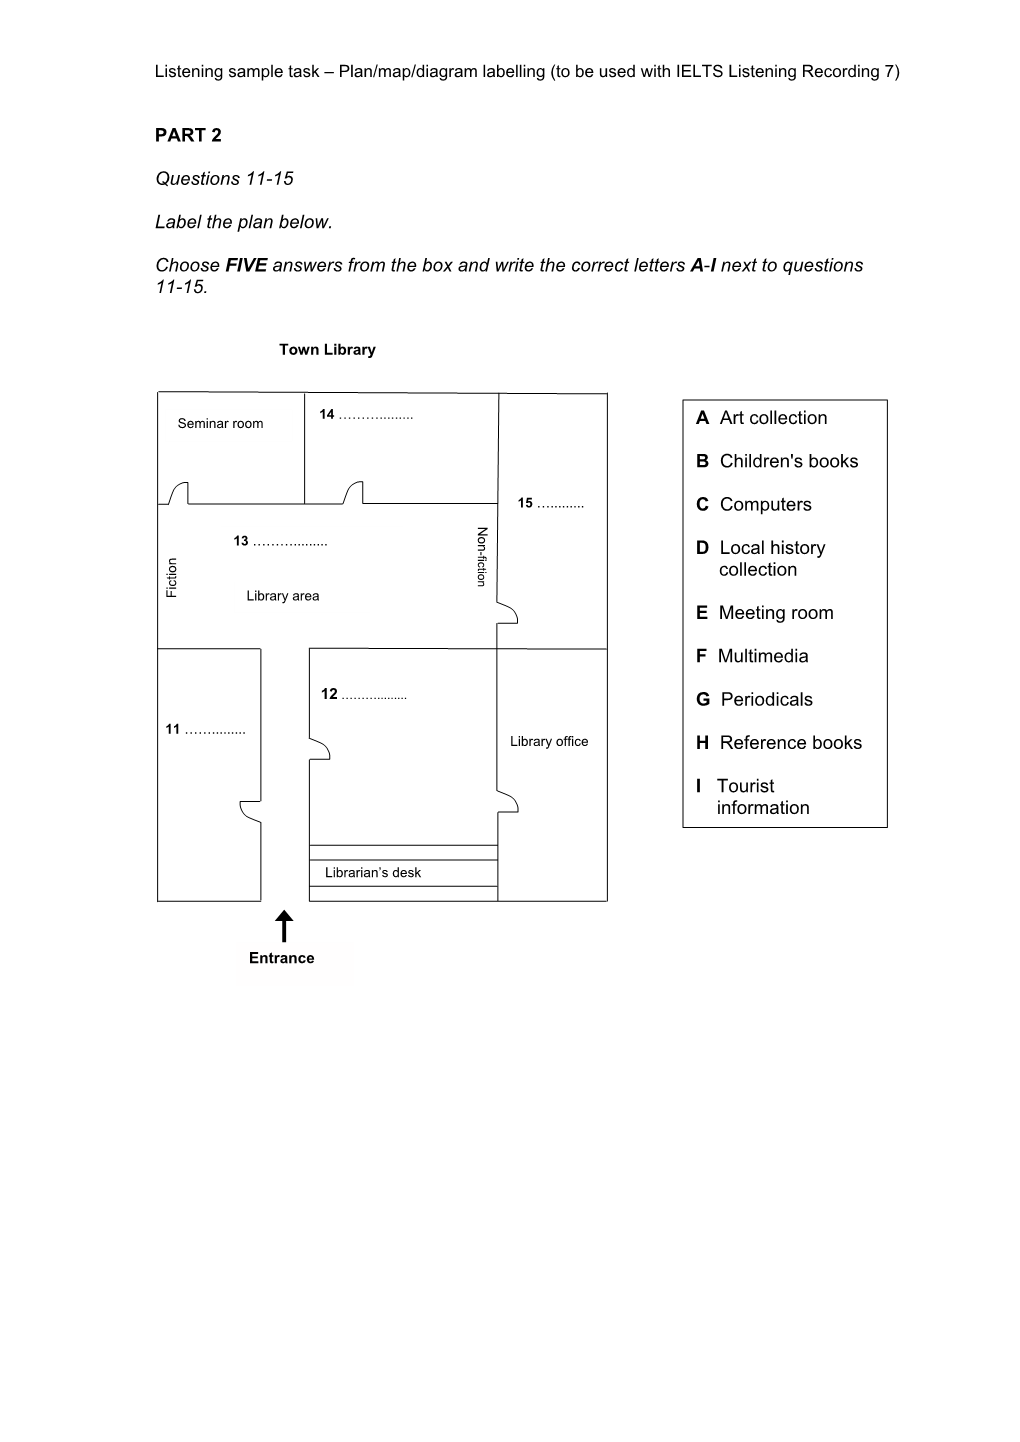 Listening Sample Task – Plan/Map/Diagram Labelling (To Be Used with IELTS Listening Recording 7)